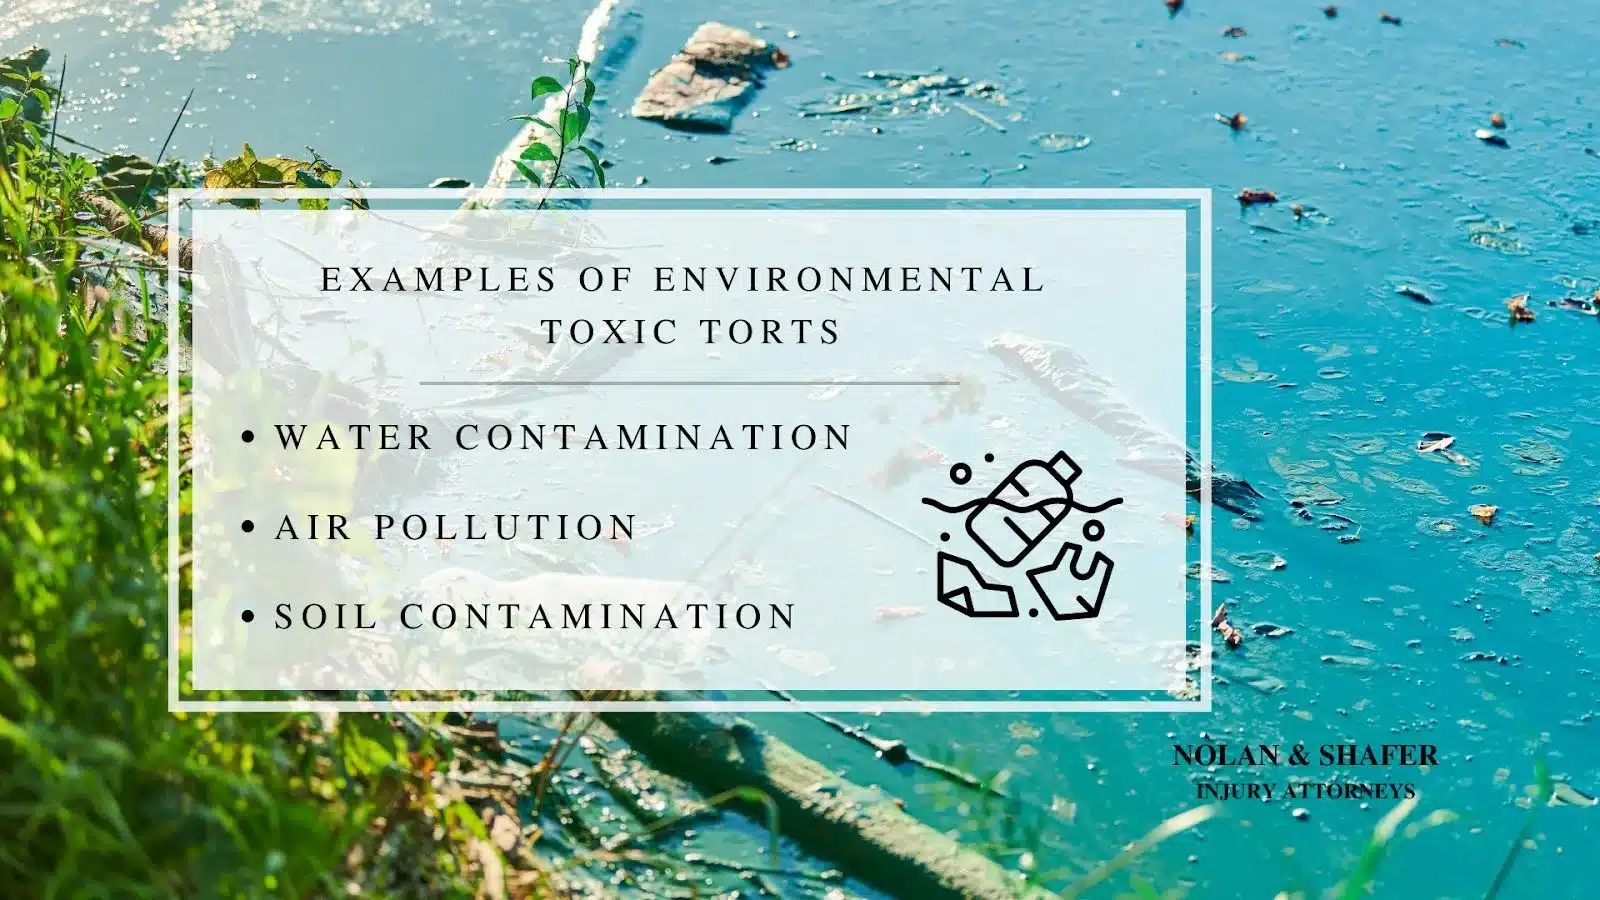 Infographic image of examples of environmental toxic torts